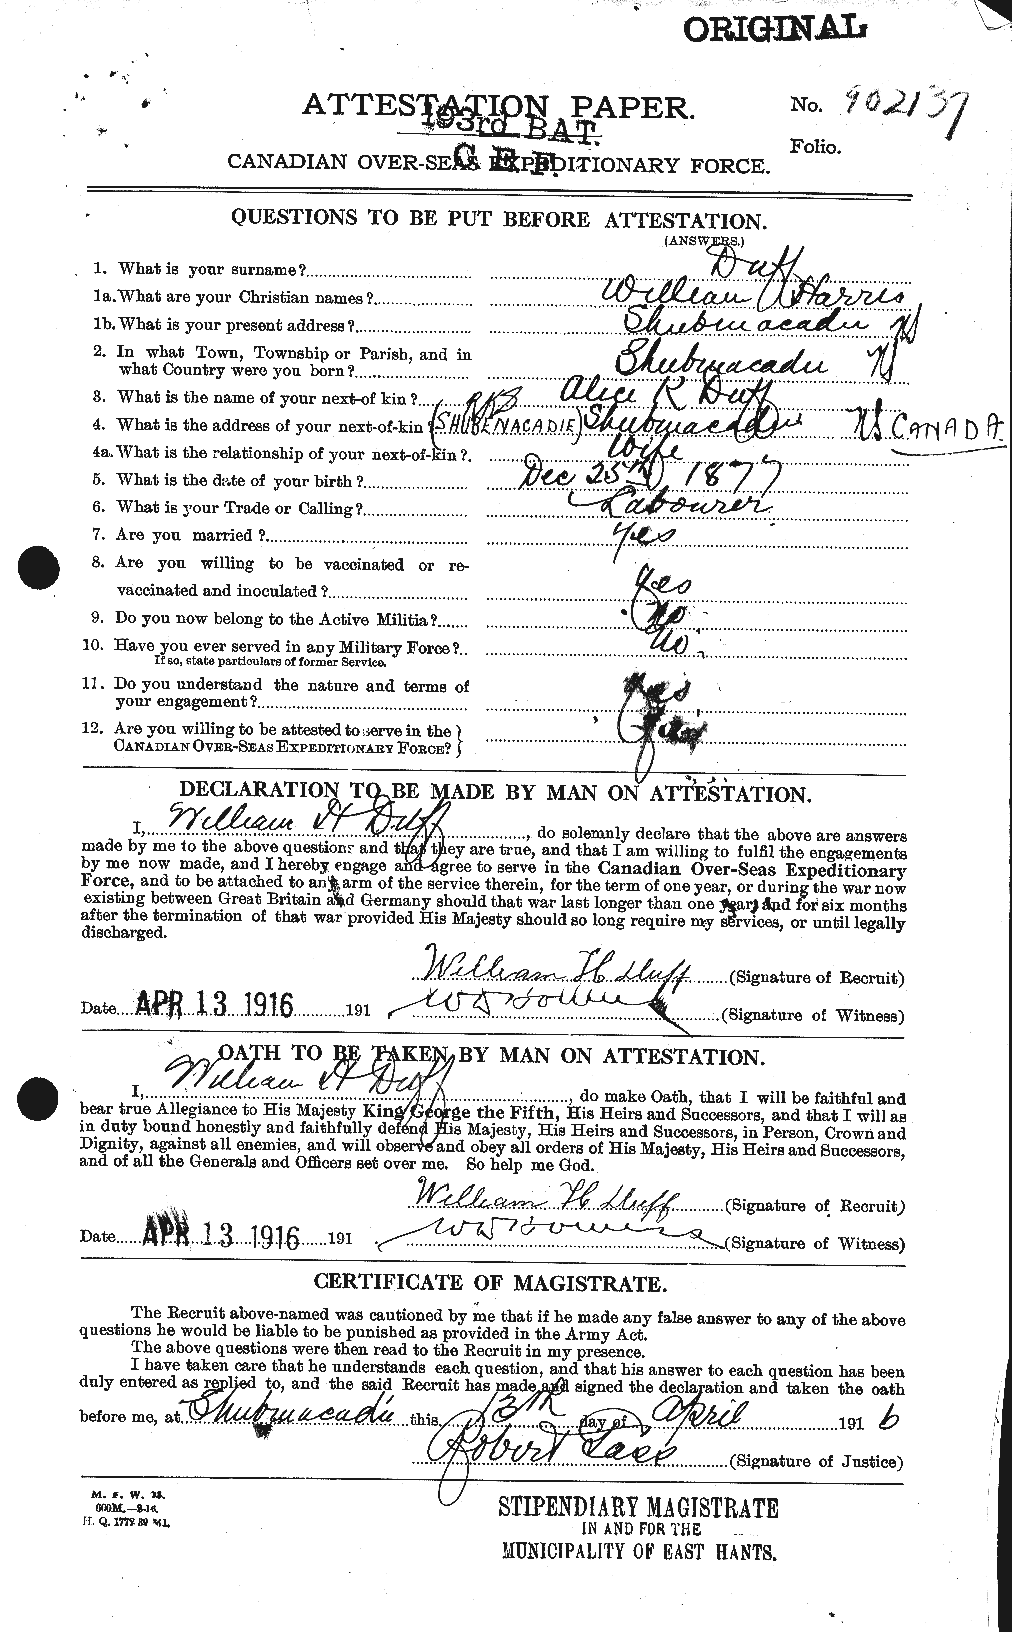 Personnel Records of the First World War - CEF 301164a